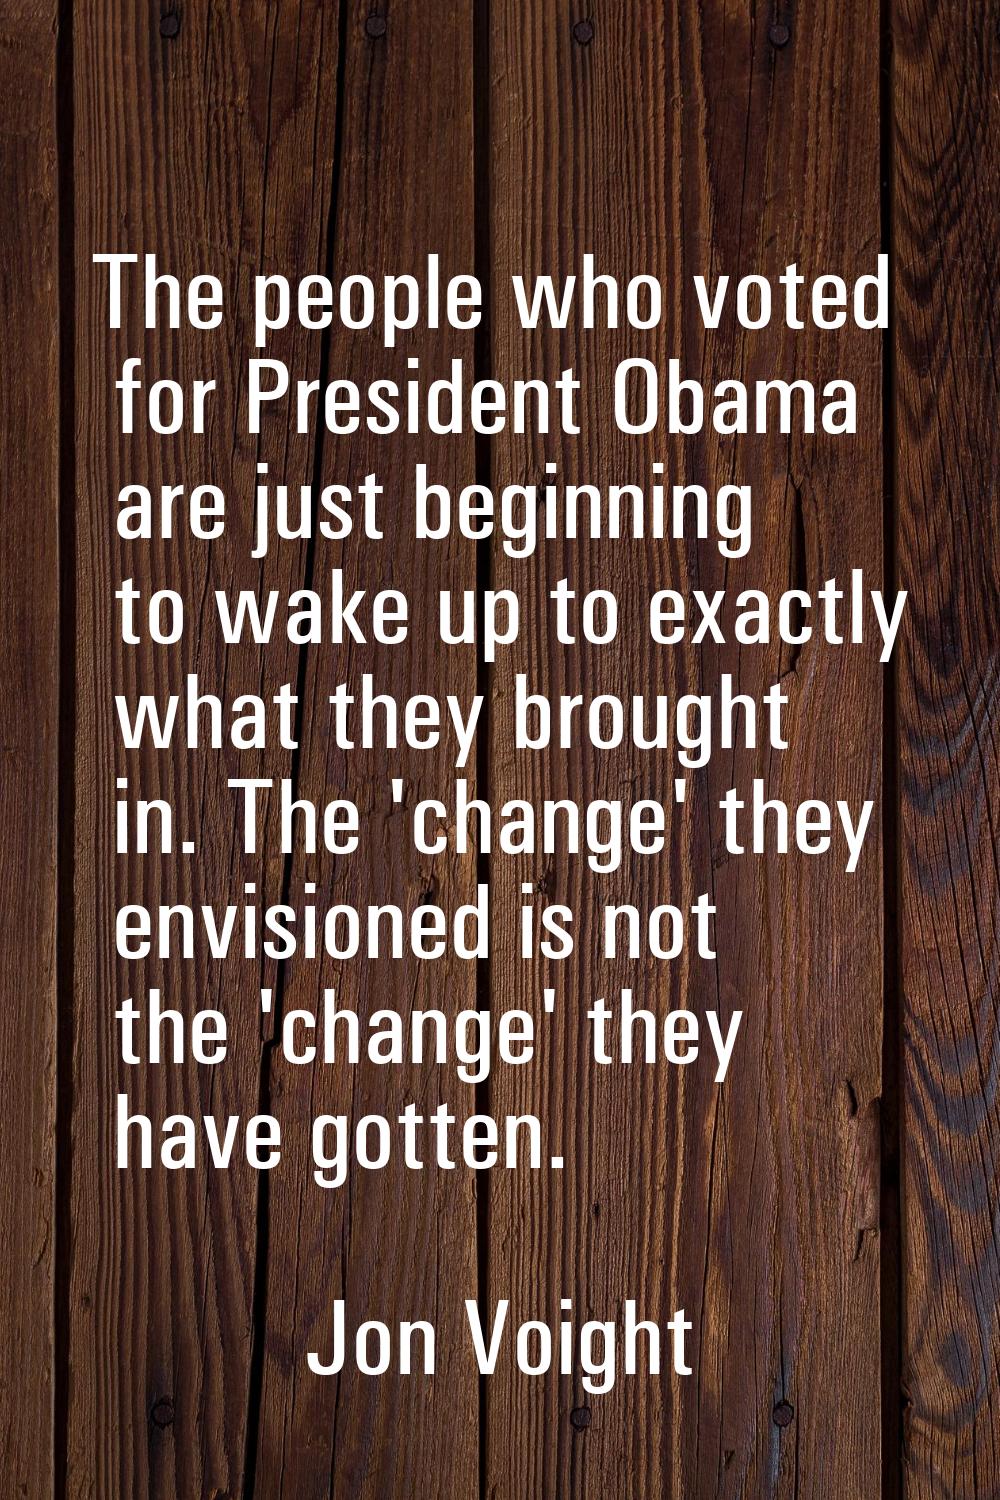 The people who voted for President Obama are just beginning to wake up to exactly what they brought